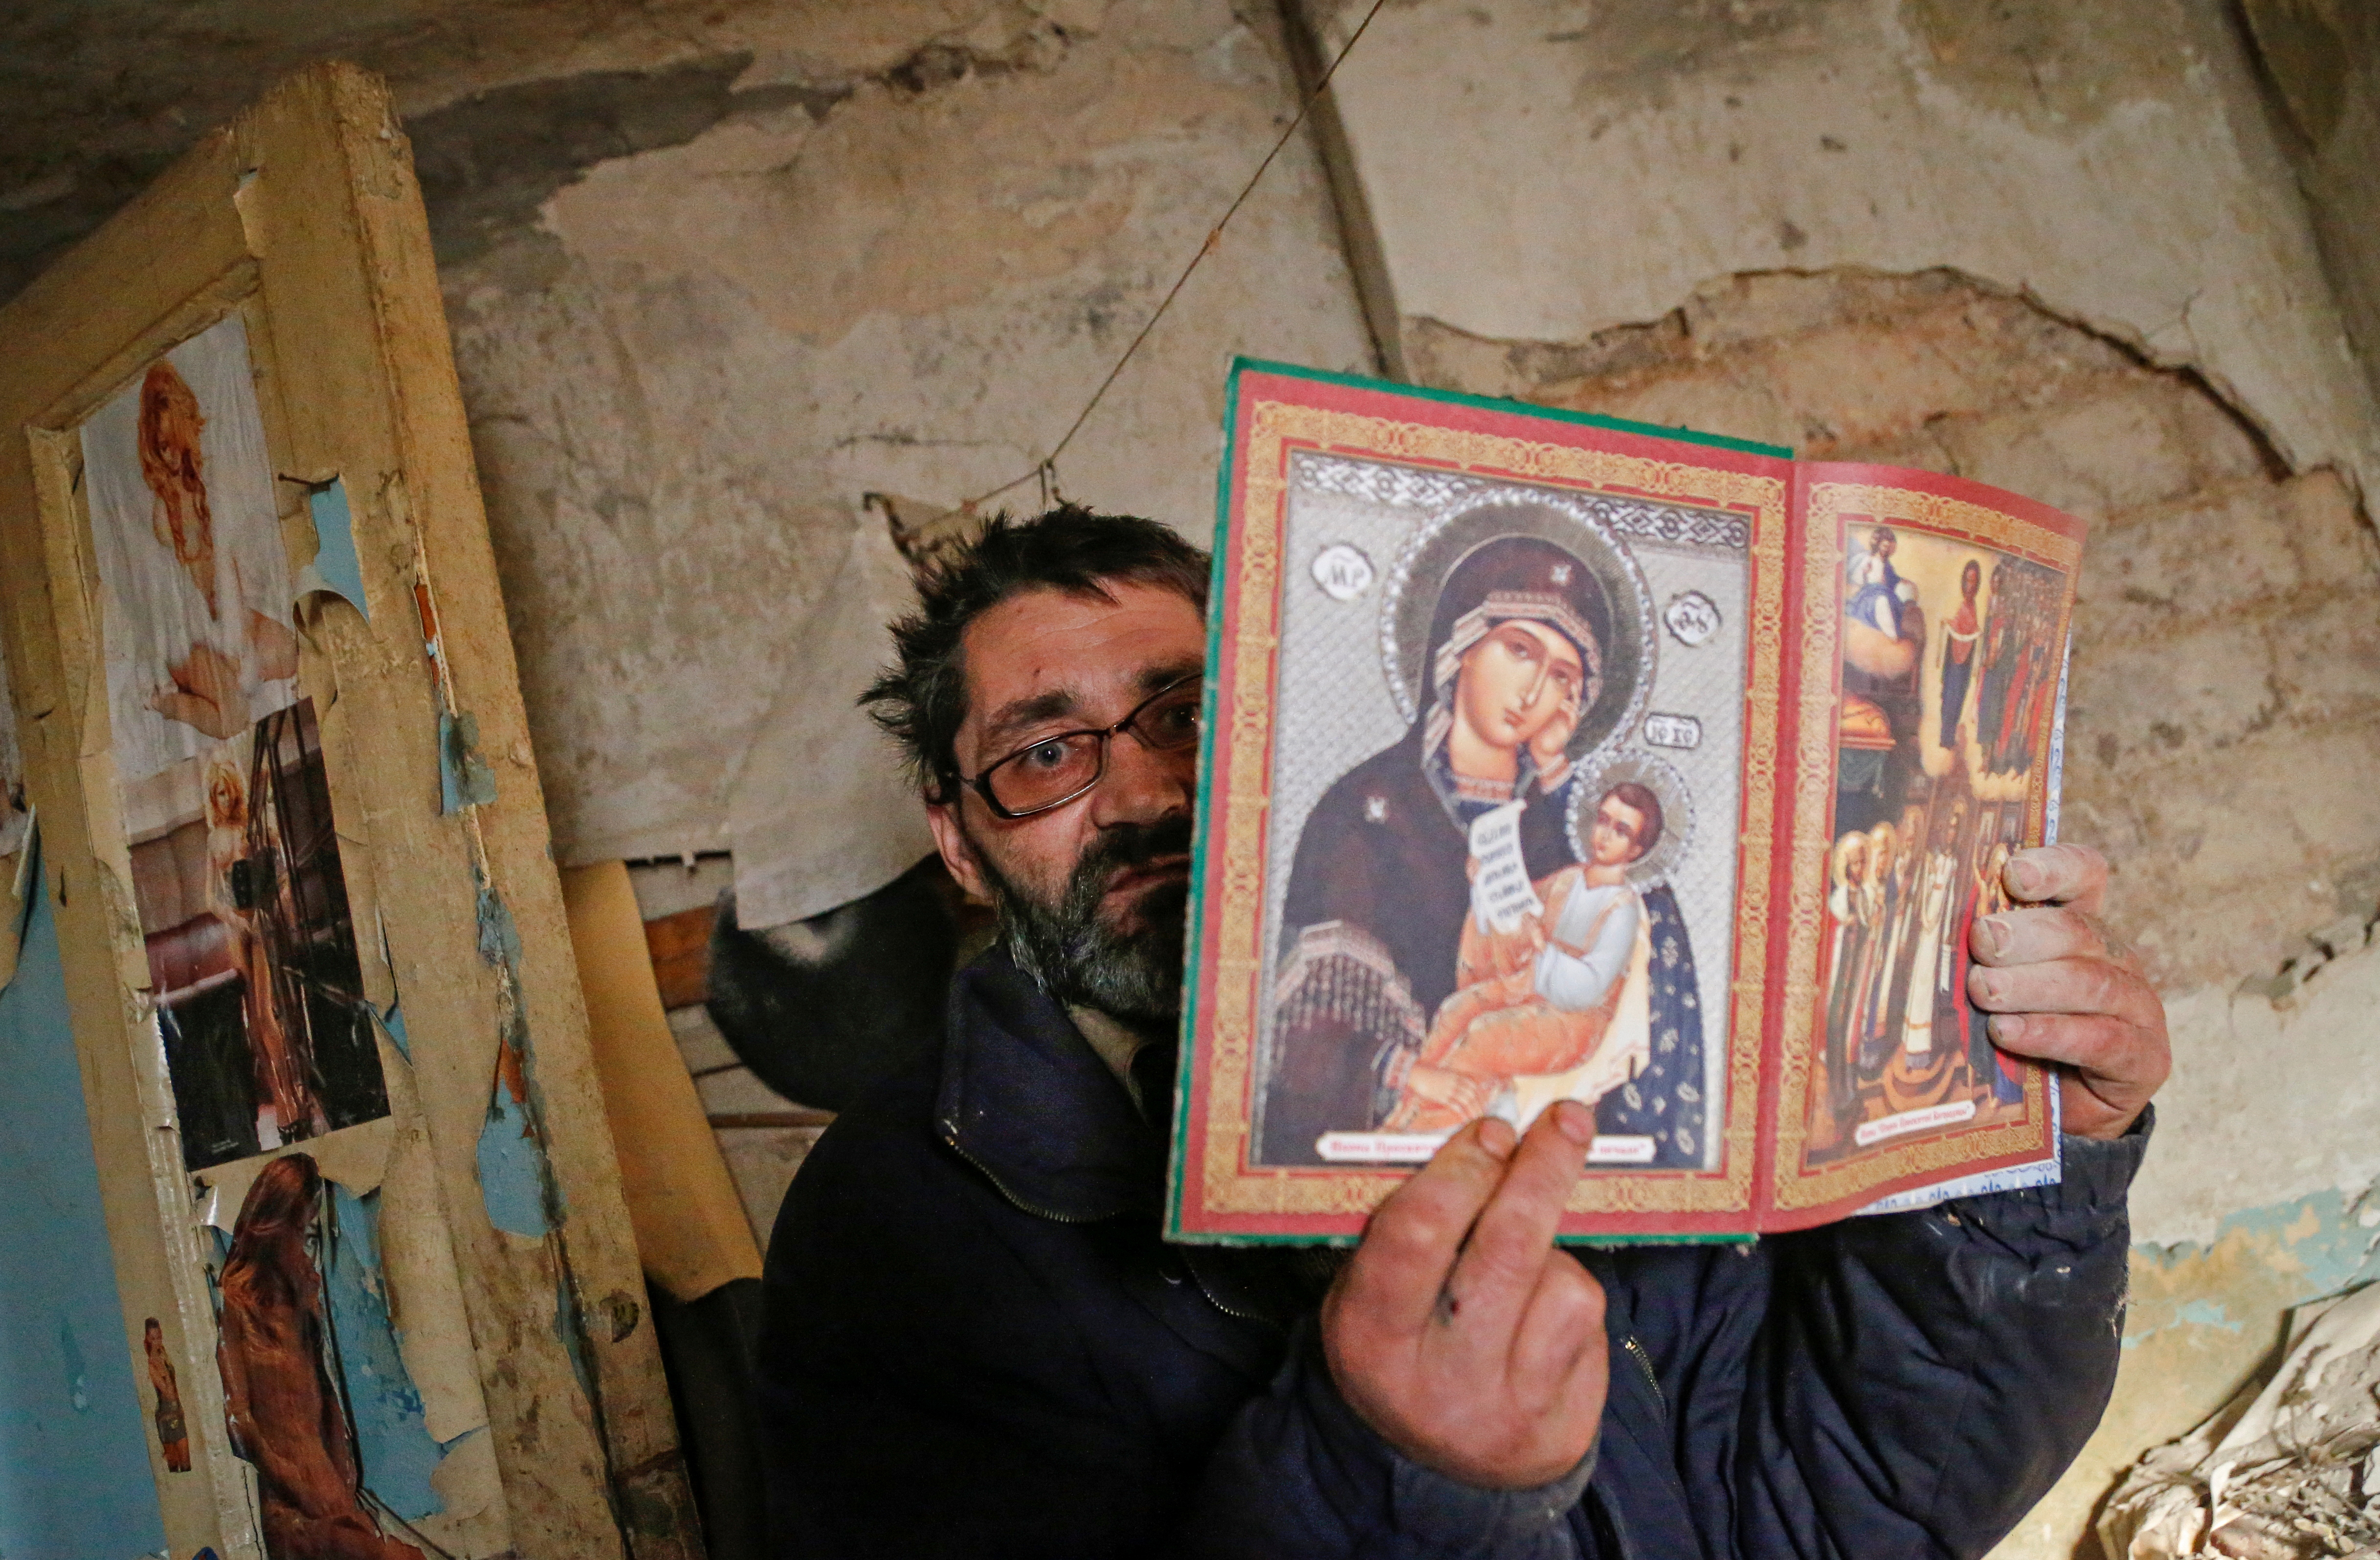 Local resident Aleksander Studenikin, 44, shows Orthodox icons inside his house, which was damaged by shelling, in the rebel-controlled town of Horlivka (Gorlovka) near Donetsk, Ukraine, November 24, 2021. Picture taken November 24, 2021.  REUTERS/Alexander Ermochenko